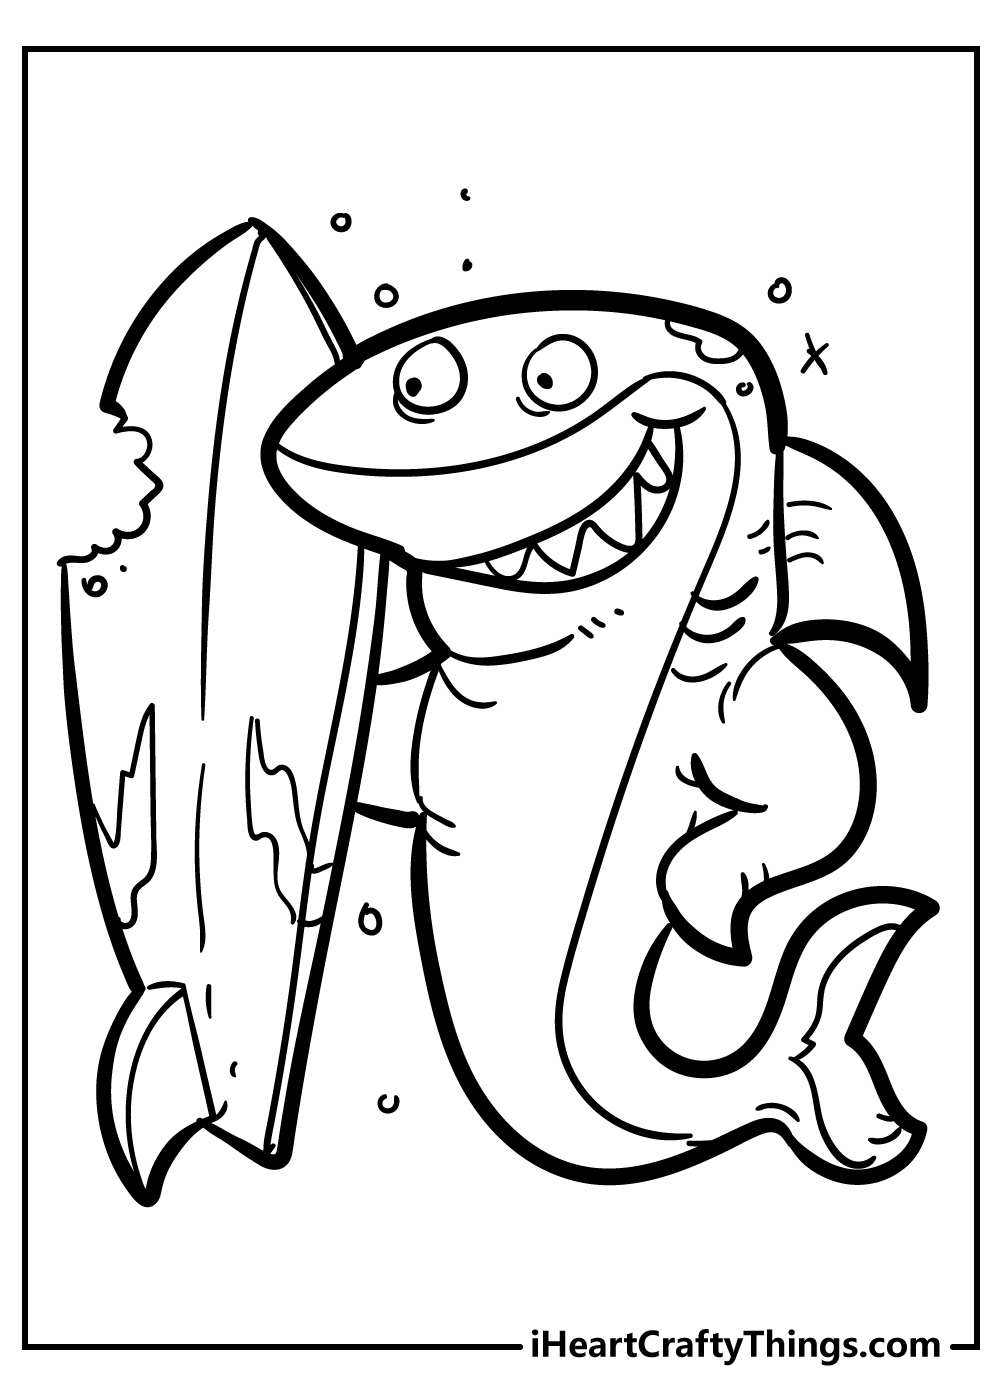 20 Shark Coloring Pages Updated 20